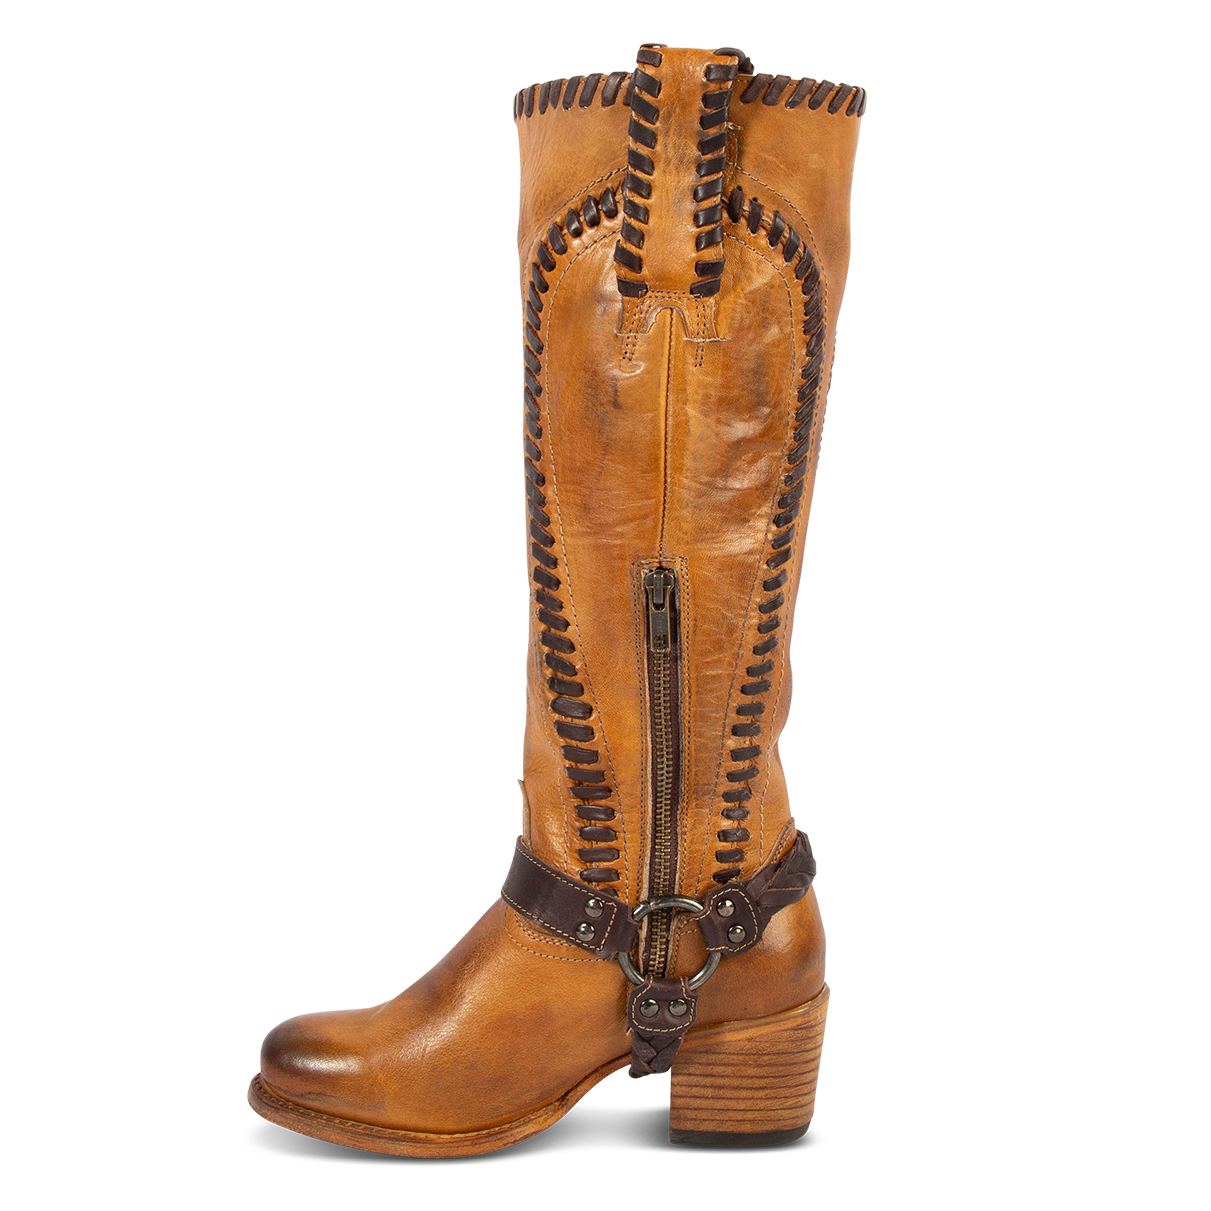 Side view showing leather pull straps, inside working brass zipper, and braided ankle harness on FREEBIRD women's Clover wheat leather boot